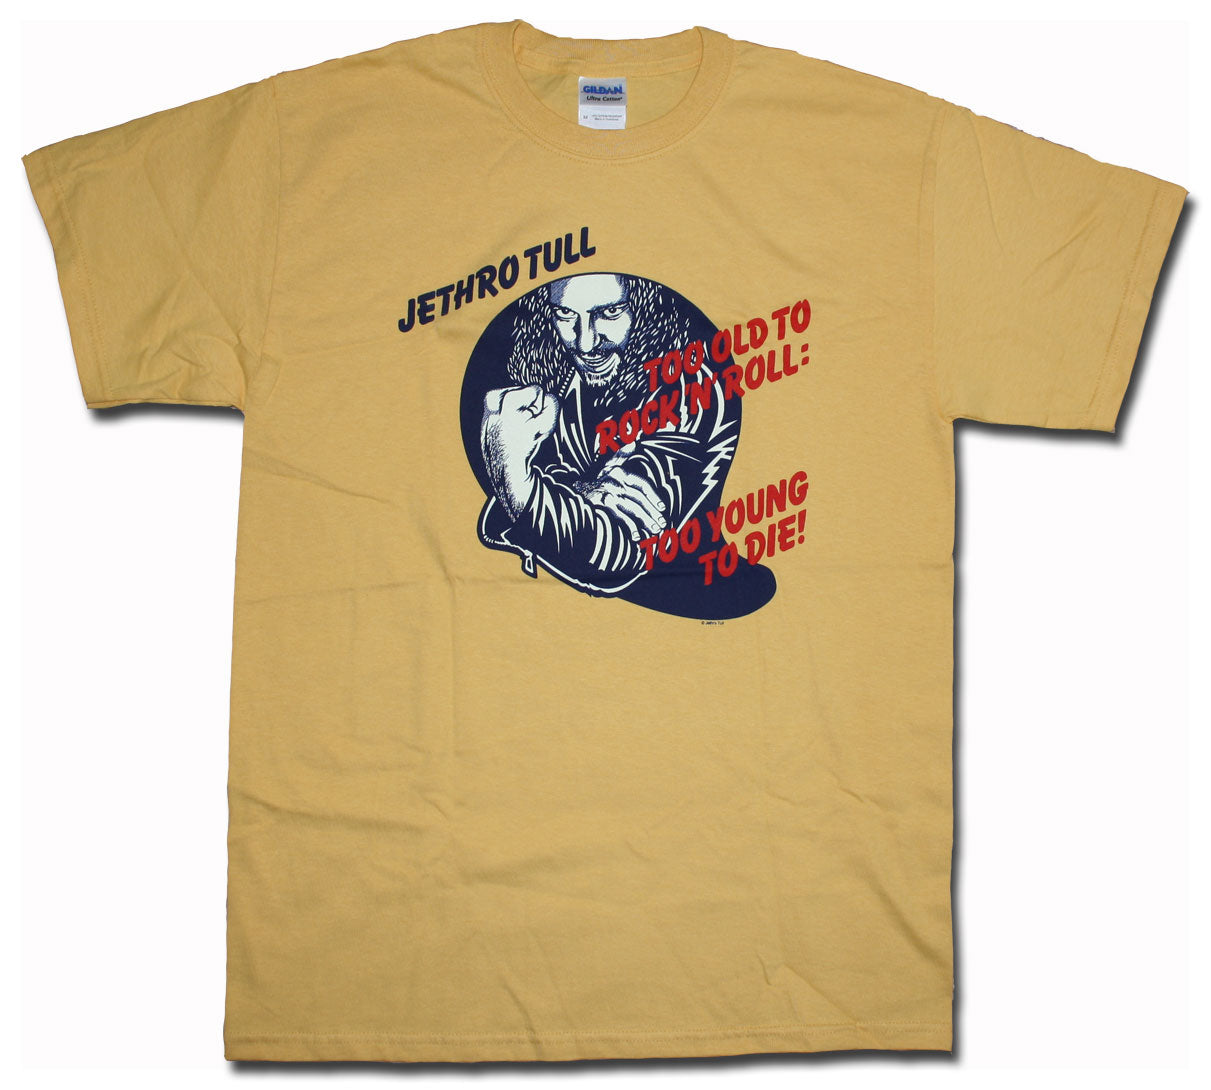 Jethro Tull T shirt - Too Old To Rock & Roll